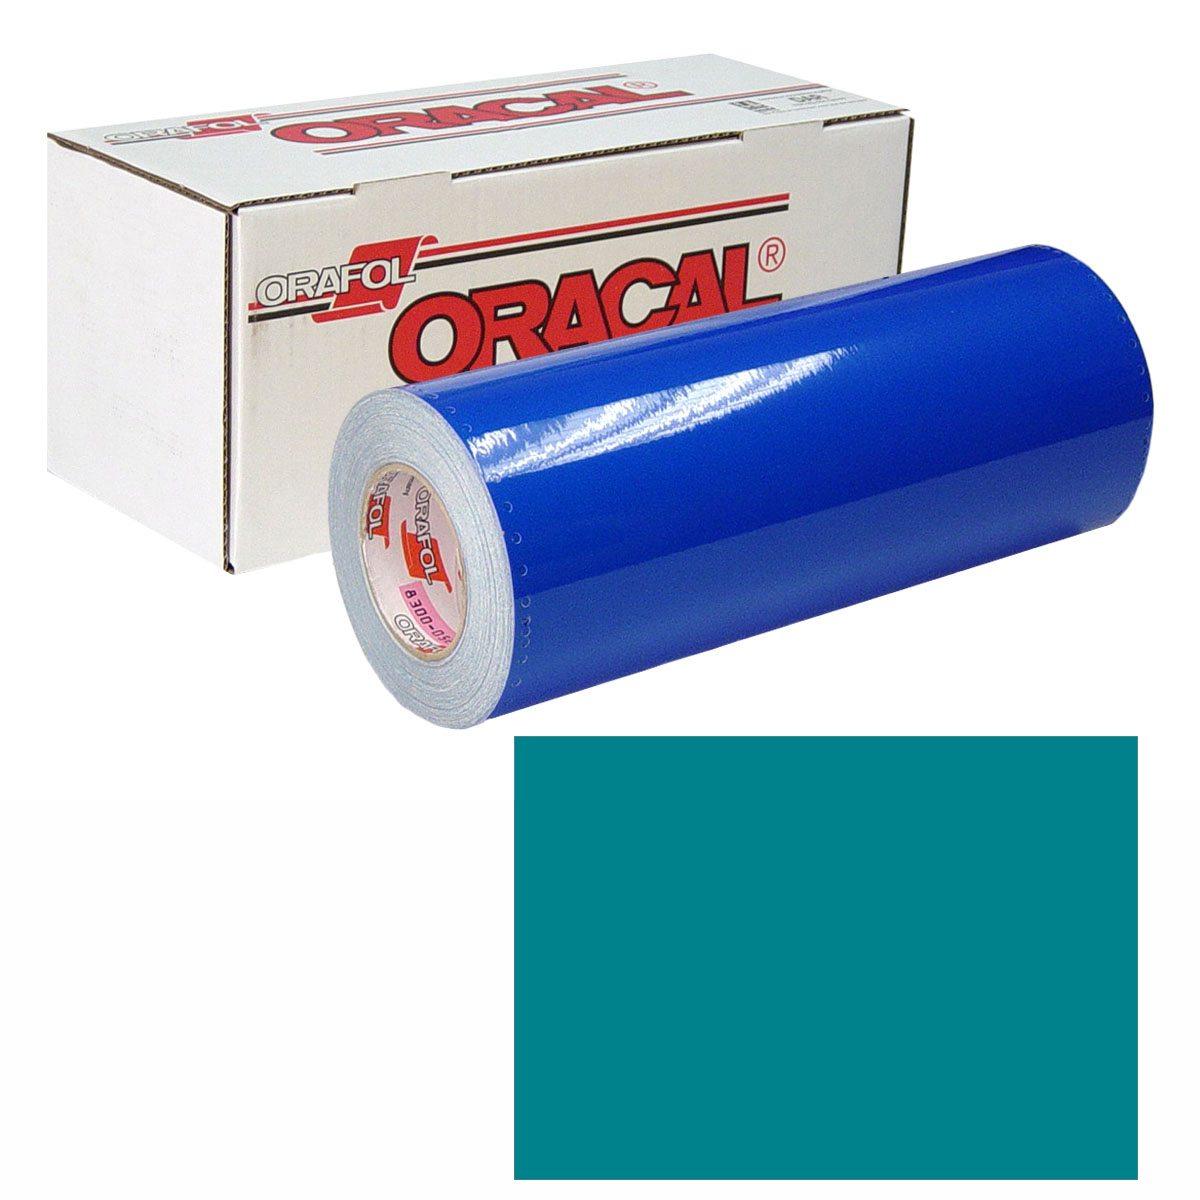 ORACAL 631 30in X 10yd 066 Turquoise Blue